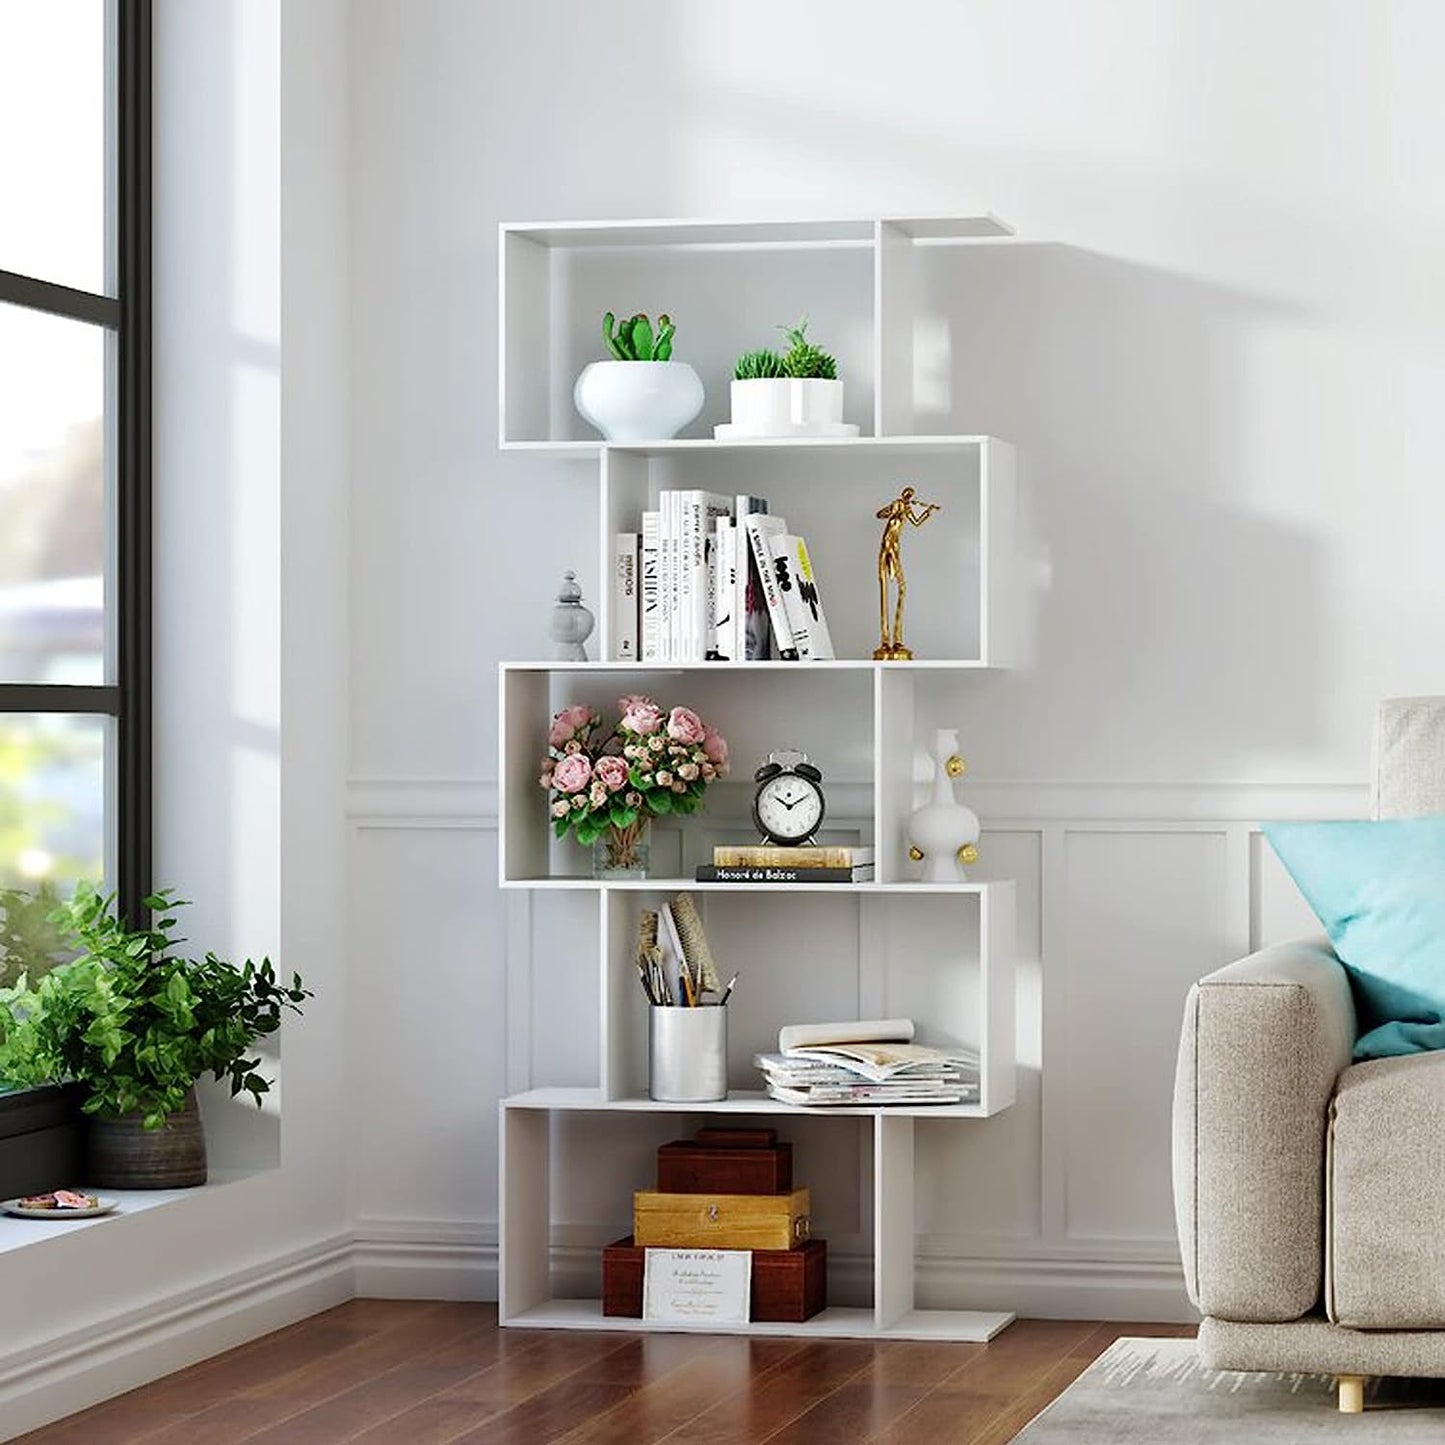 Function Home 5-Tier Bookshelf, Wooden S-Shaped Bookcase,